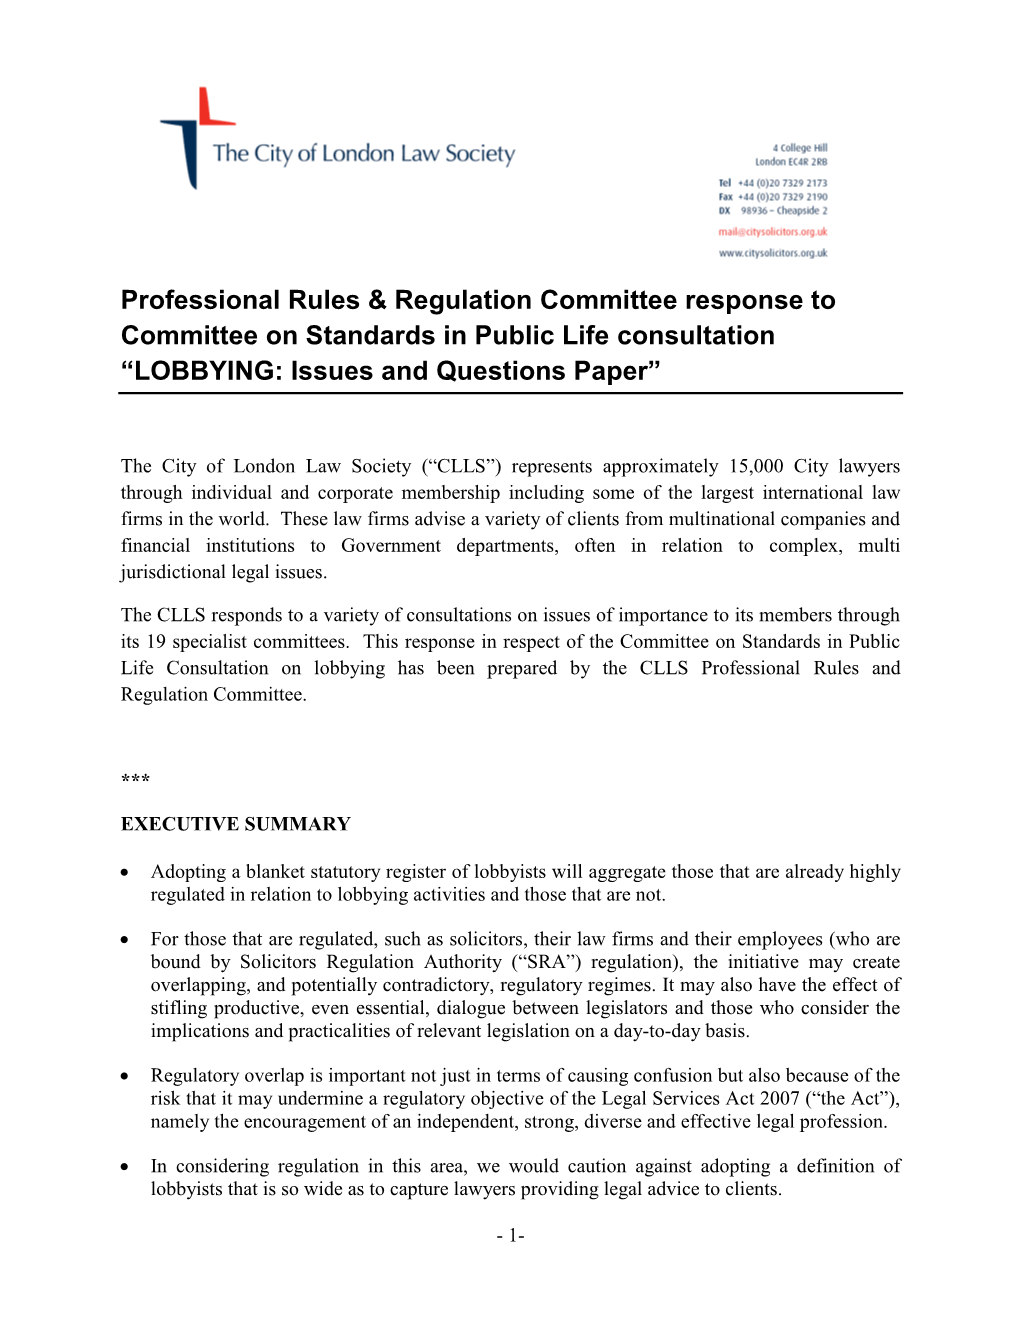 Response to Committee on Standards in Public Life Consultation On